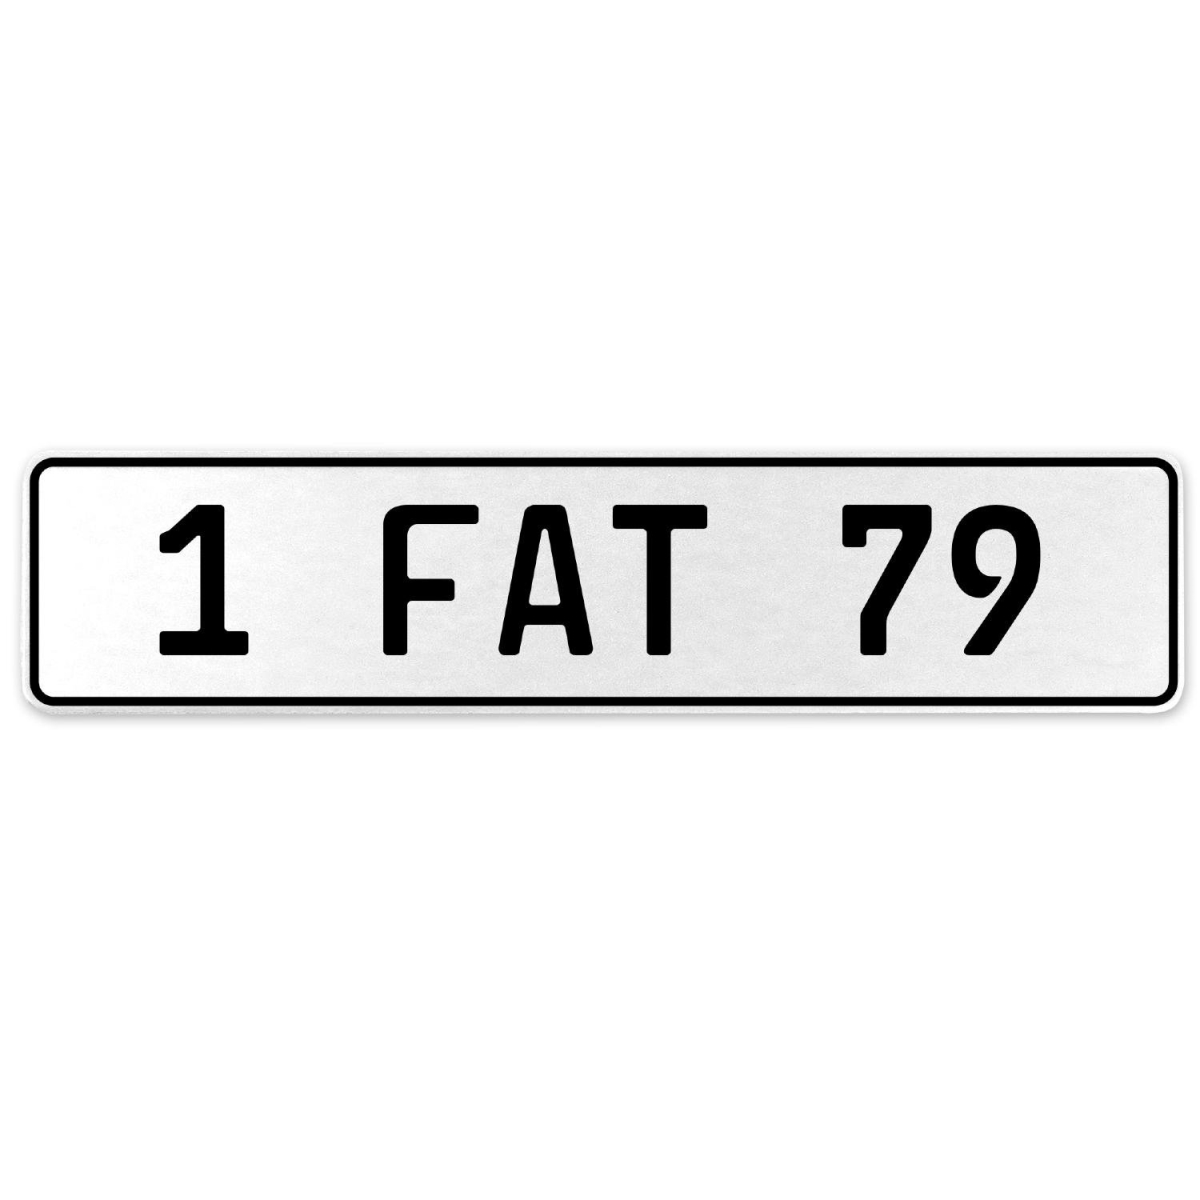 554676 1 Fat 79 - White Aluminum Street Sign Mancave Euro Plate Name Door Sign Wall